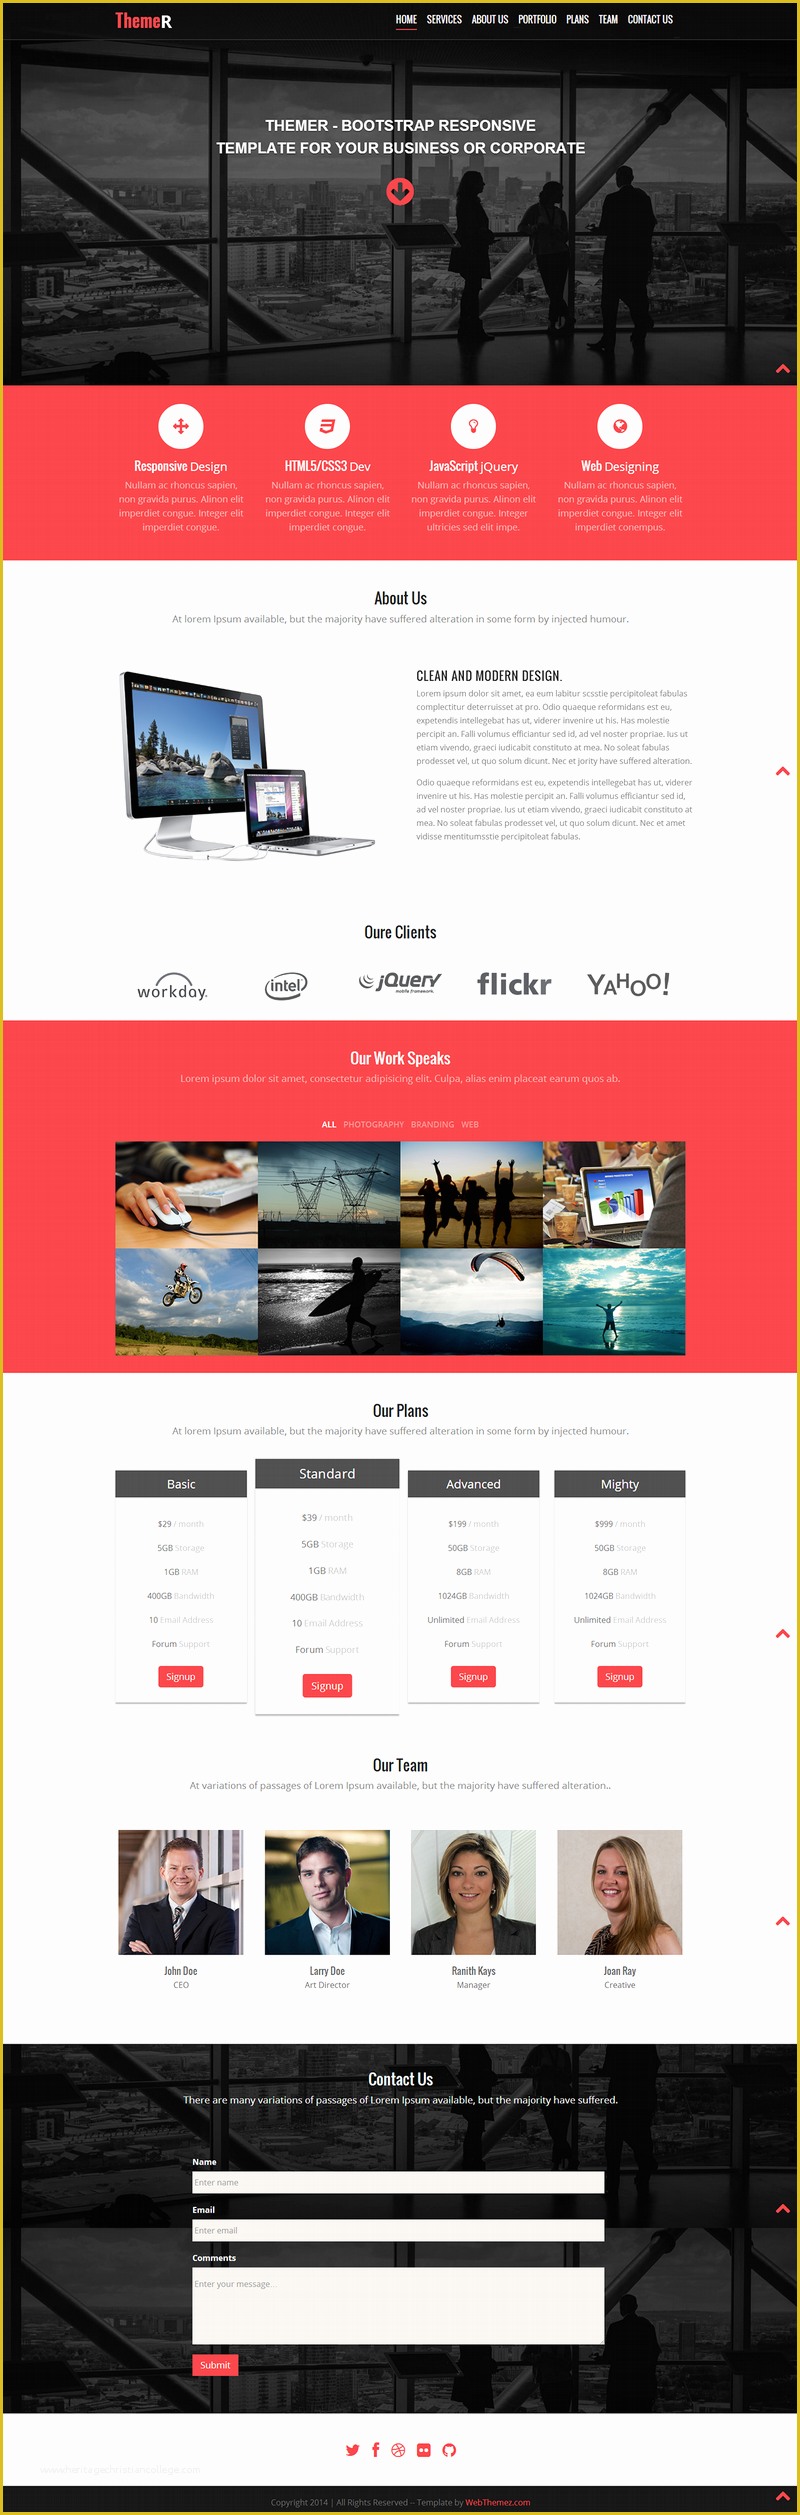 Free Responsive Web Templates Of 10 Best Free Website HTML5 Templates – August 2014